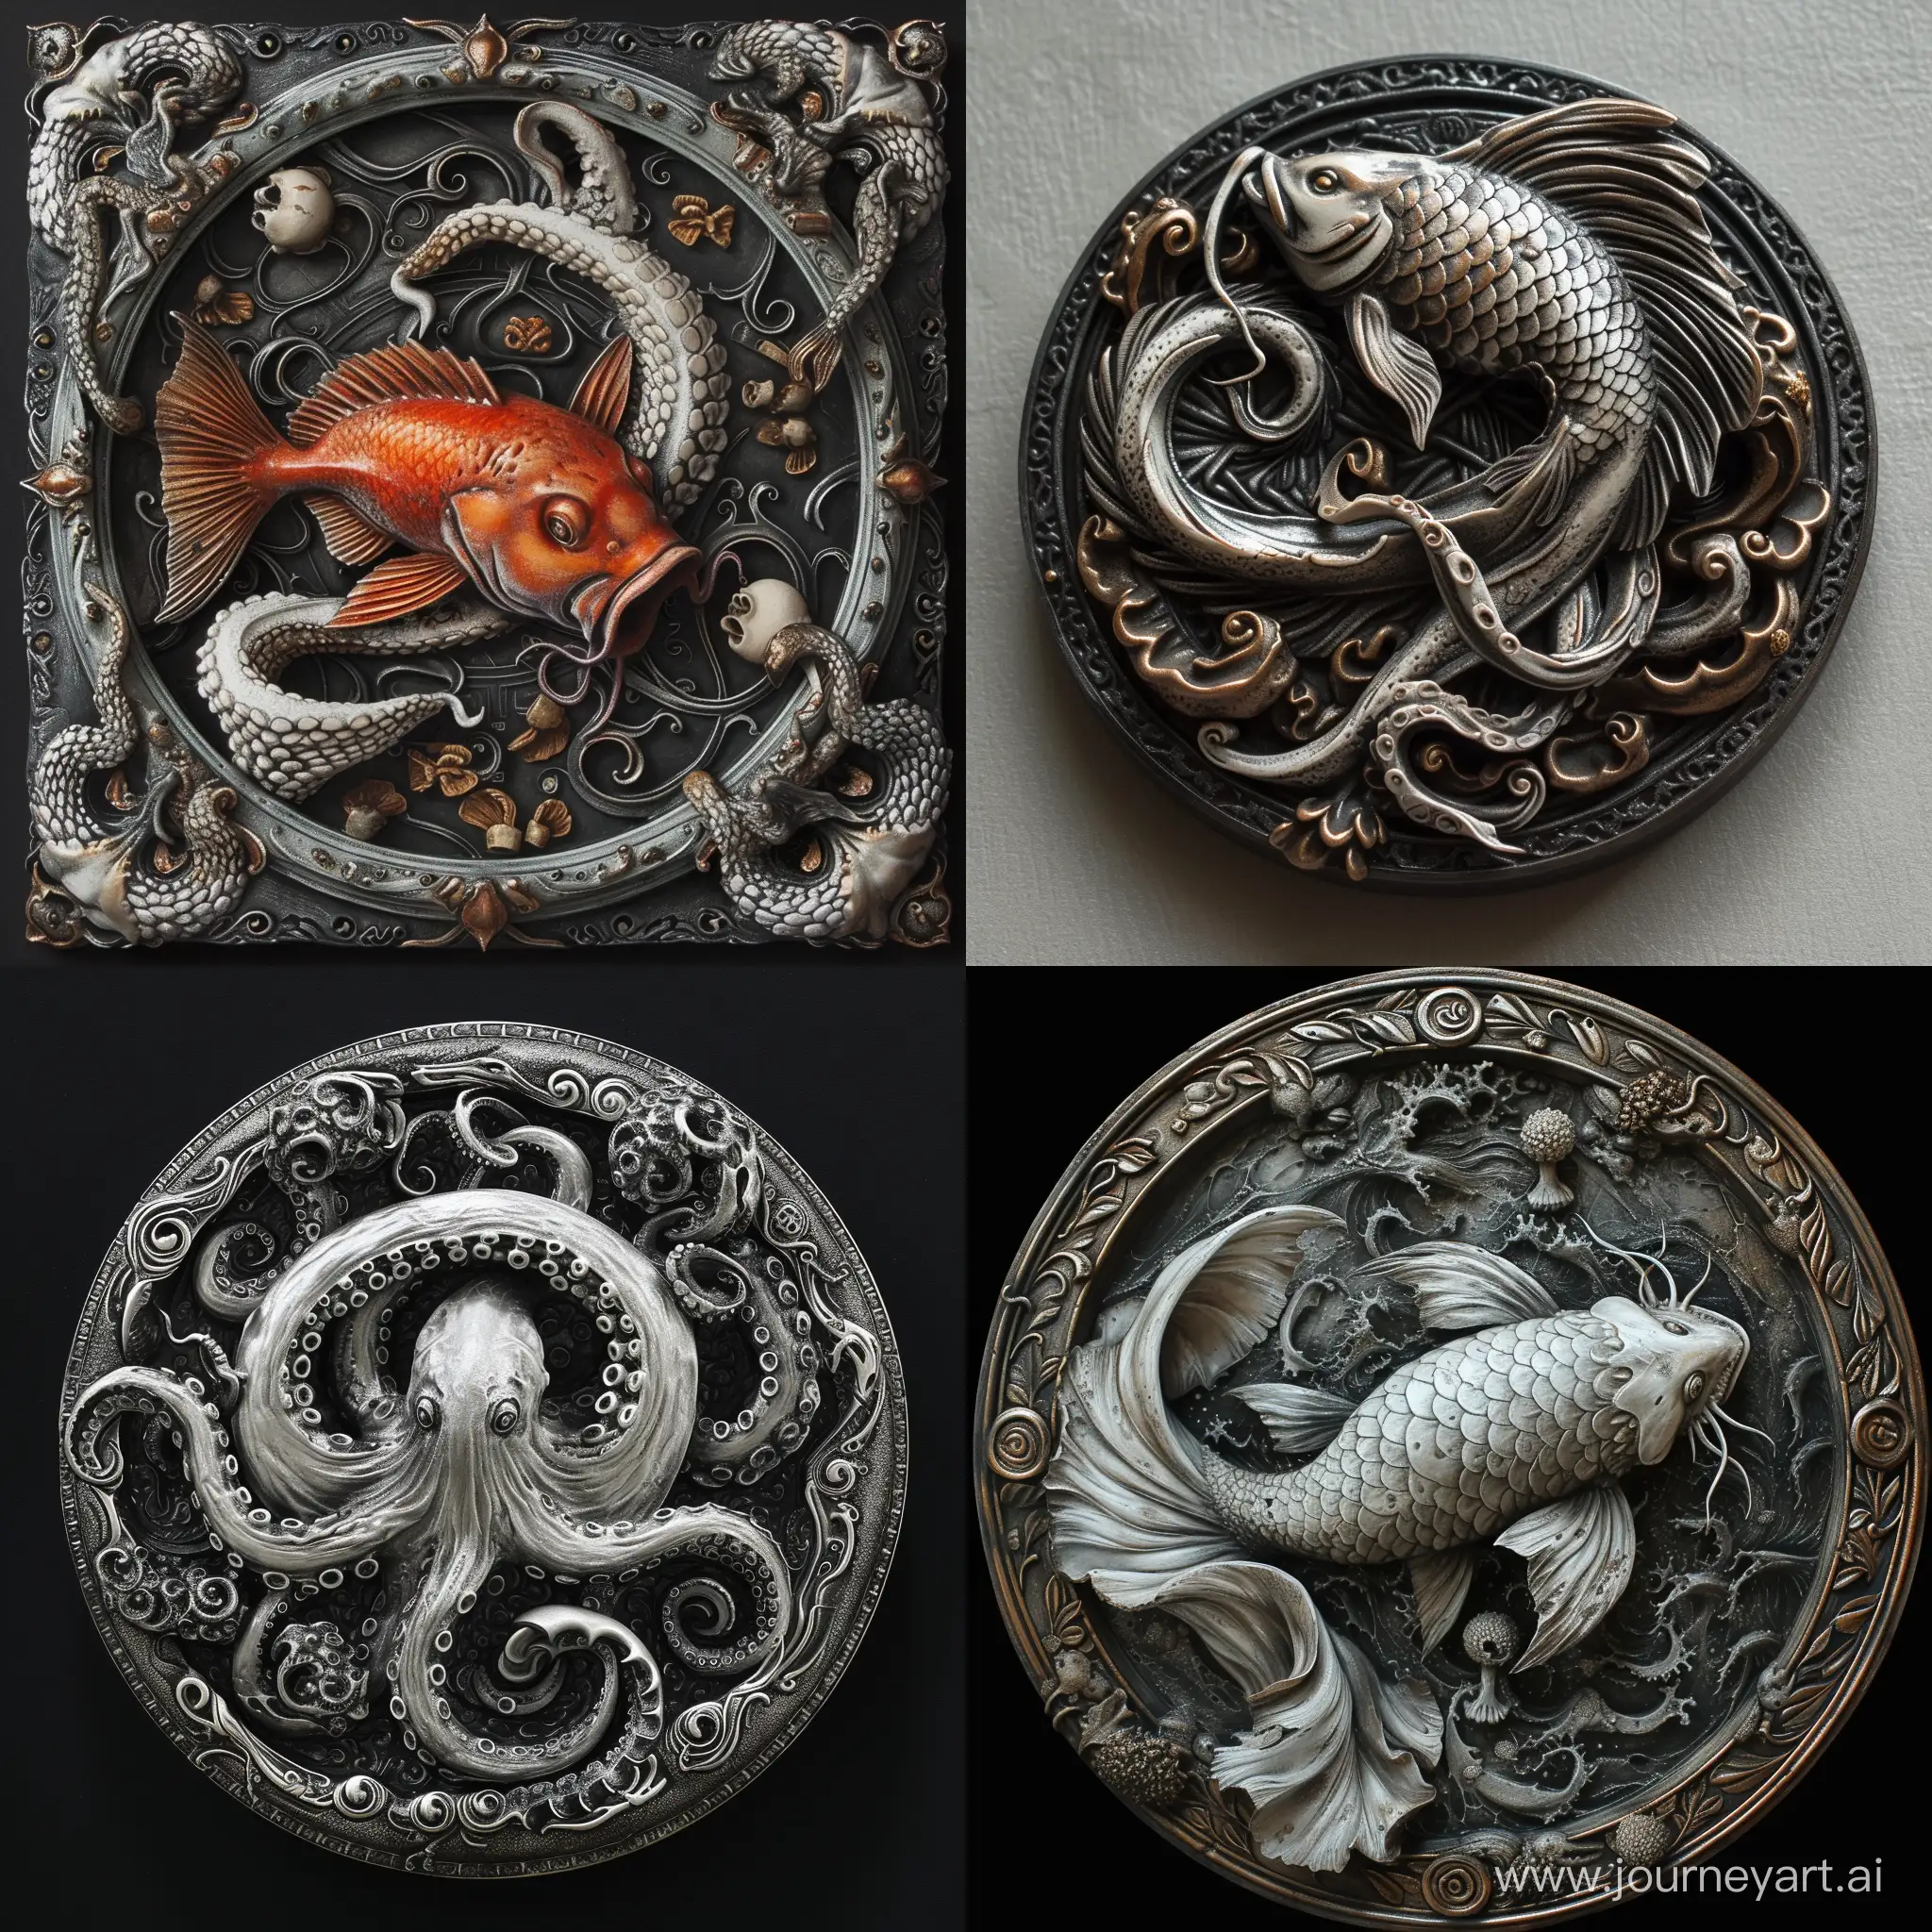 The image of a silver pendant. In the middle of the pendant there is an angler fish on the background of a flame of fire and hands :: Around the fish is a wheel with a pattern on the border consisting of octopus tentacles and human legs:: realistic